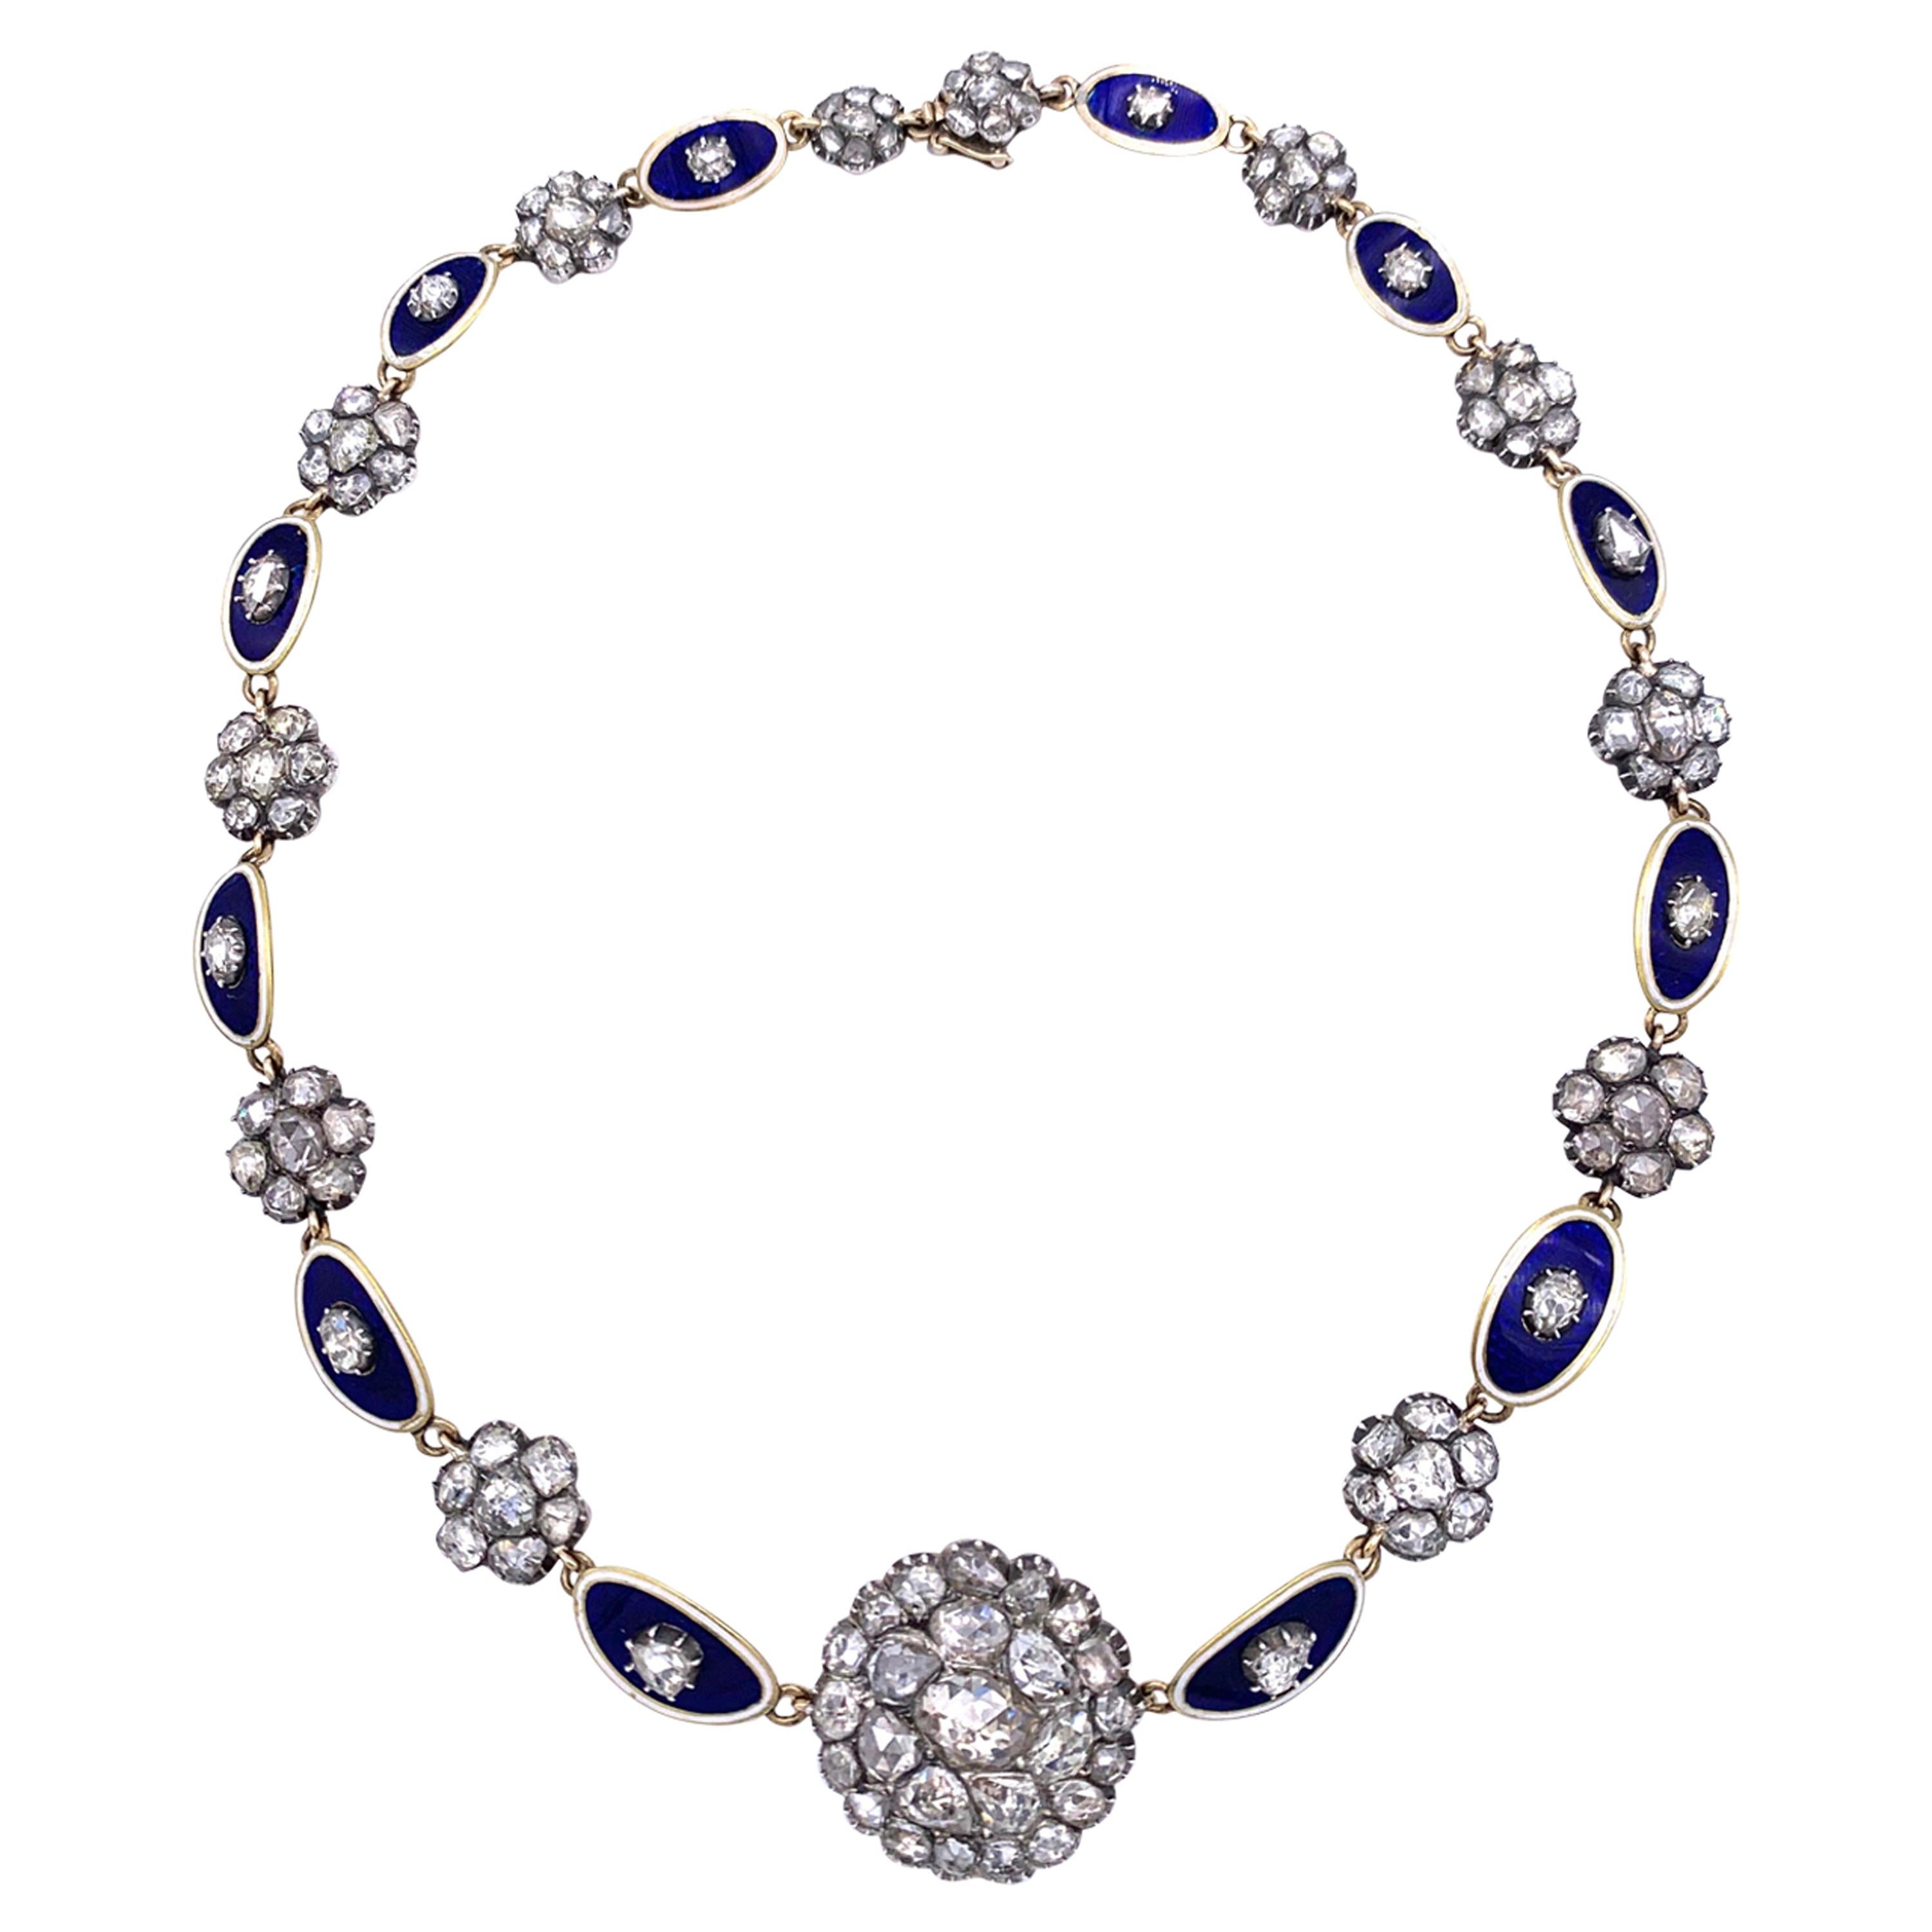 This magnificent and extremely rare Georgian necklace is composed of flower ornaments set with old cut diamonds mounted in silber on gold.
At the centre of the necklace is a large rosette set with 25 old cut diamonds. Twelve diamond set elements